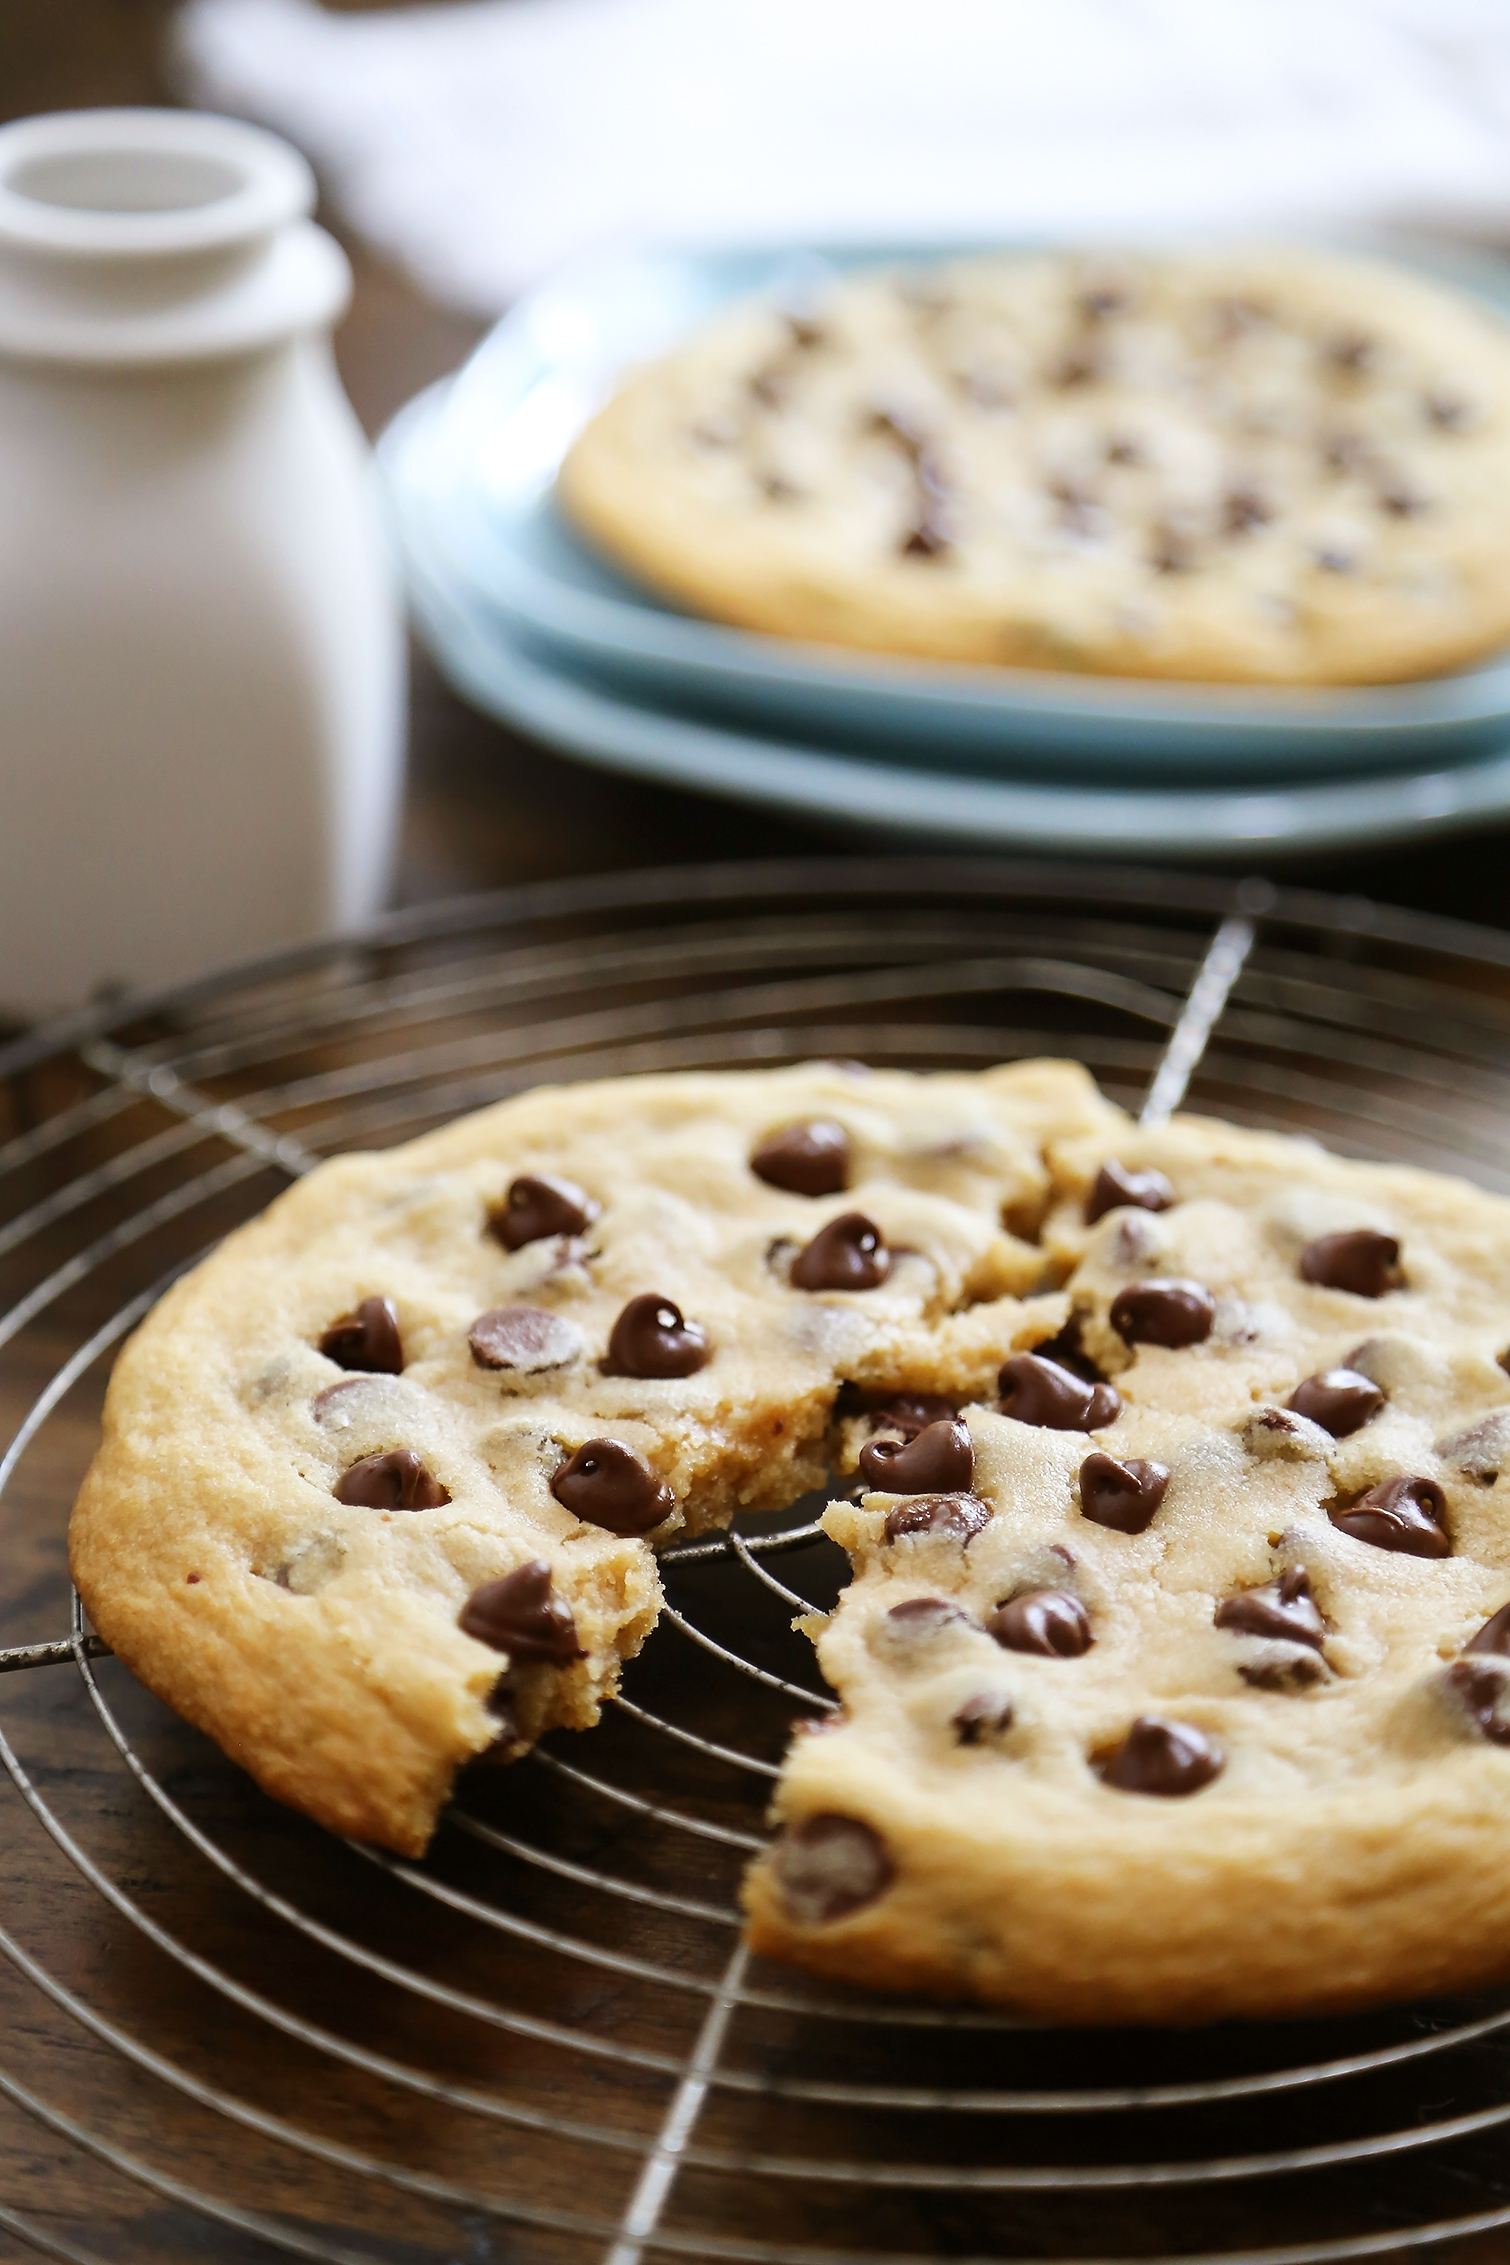 Emergency Chocolate Chip Cookie for Two - Giant, gooey cookies for a bad day! Quick and easy cookies to share or freeze for later. thecomfortofcooking.com